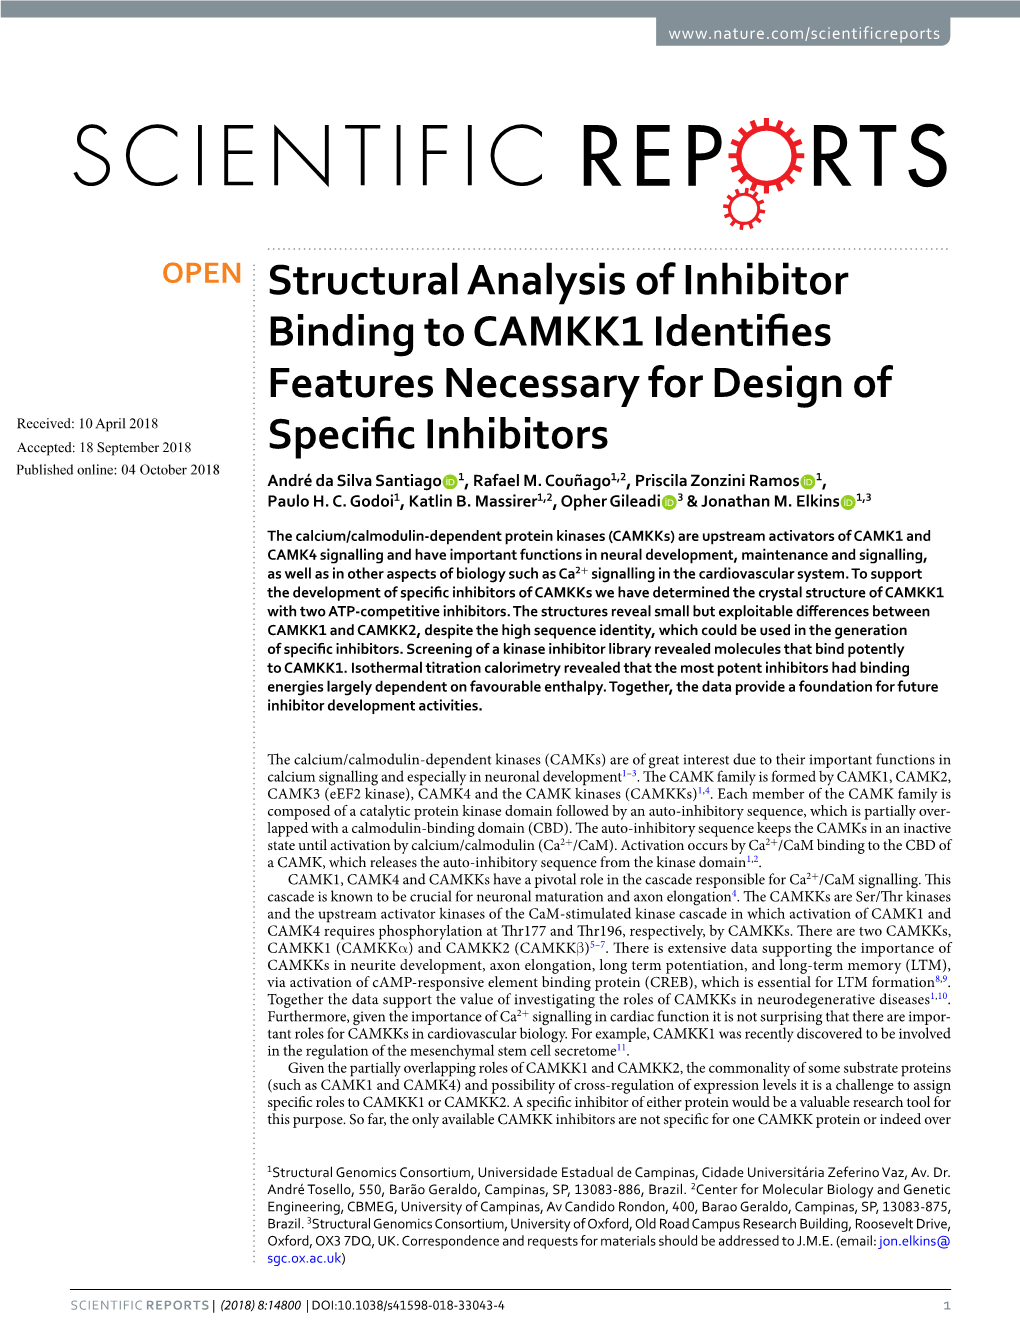 Structural Analysis of Inhibitor Binding to CAMKK1 Identifies Features Necessary for Design of Specific Inhibitors